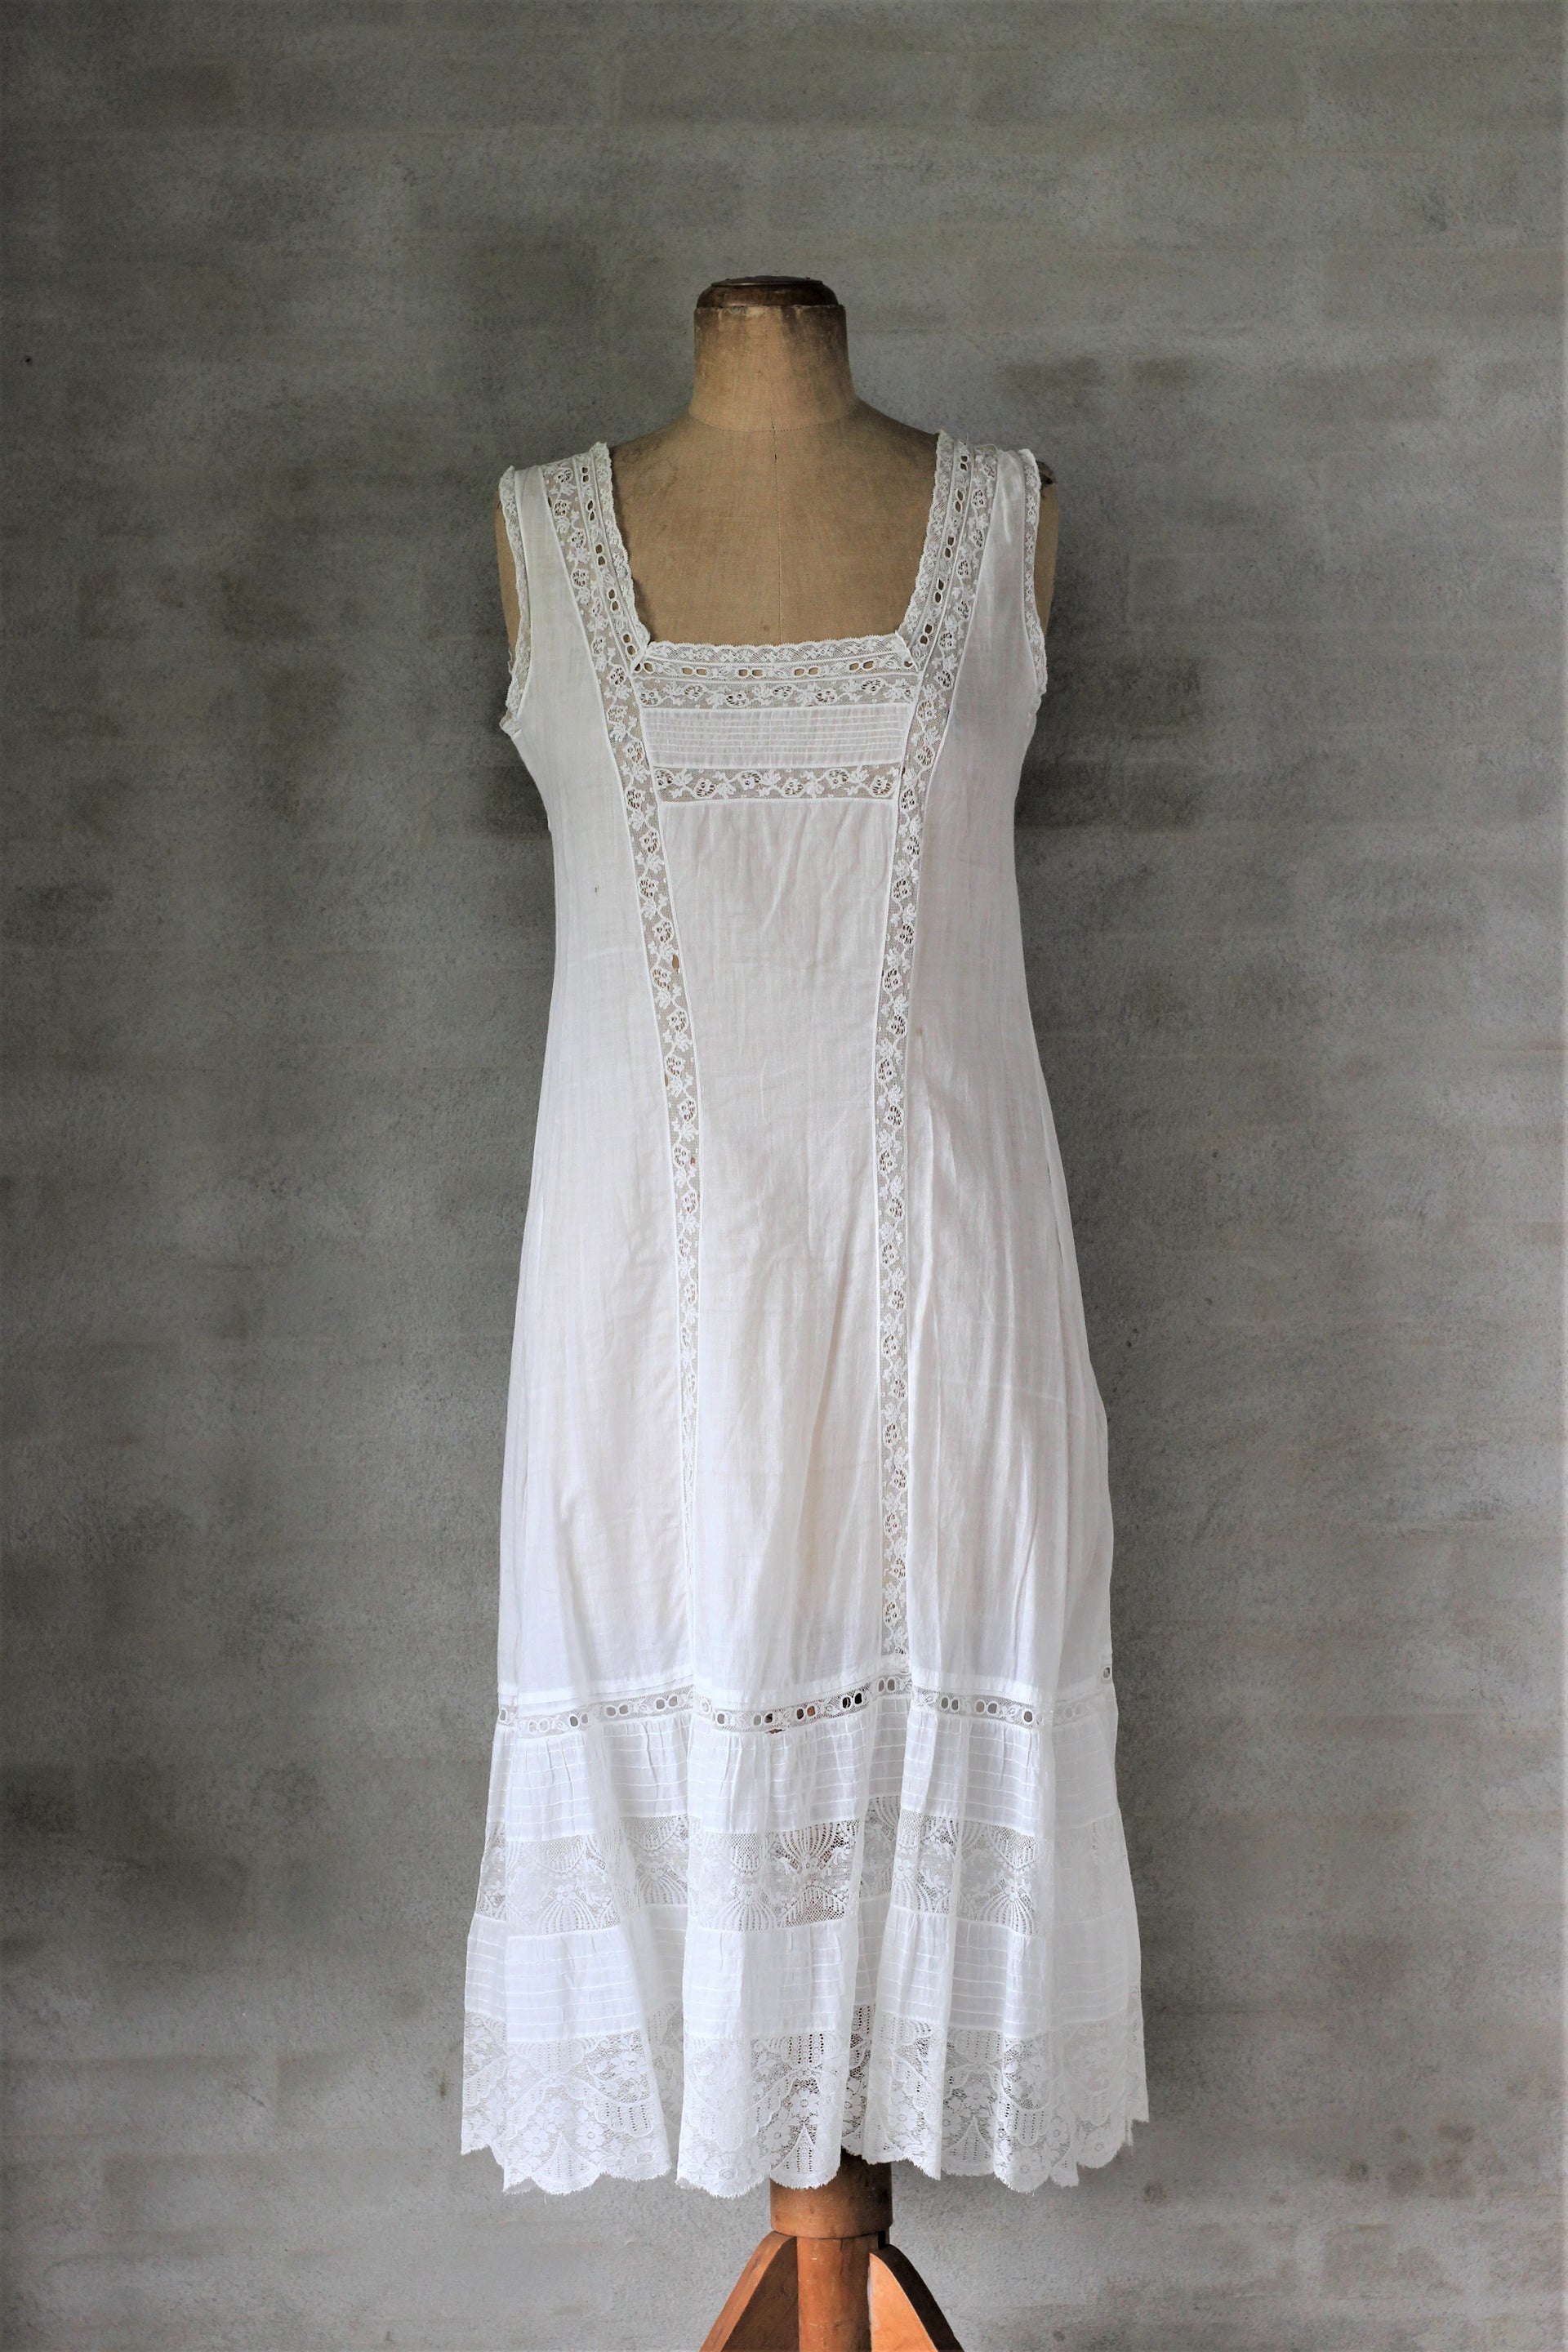 1920s White Cotton Dress with Embroidery